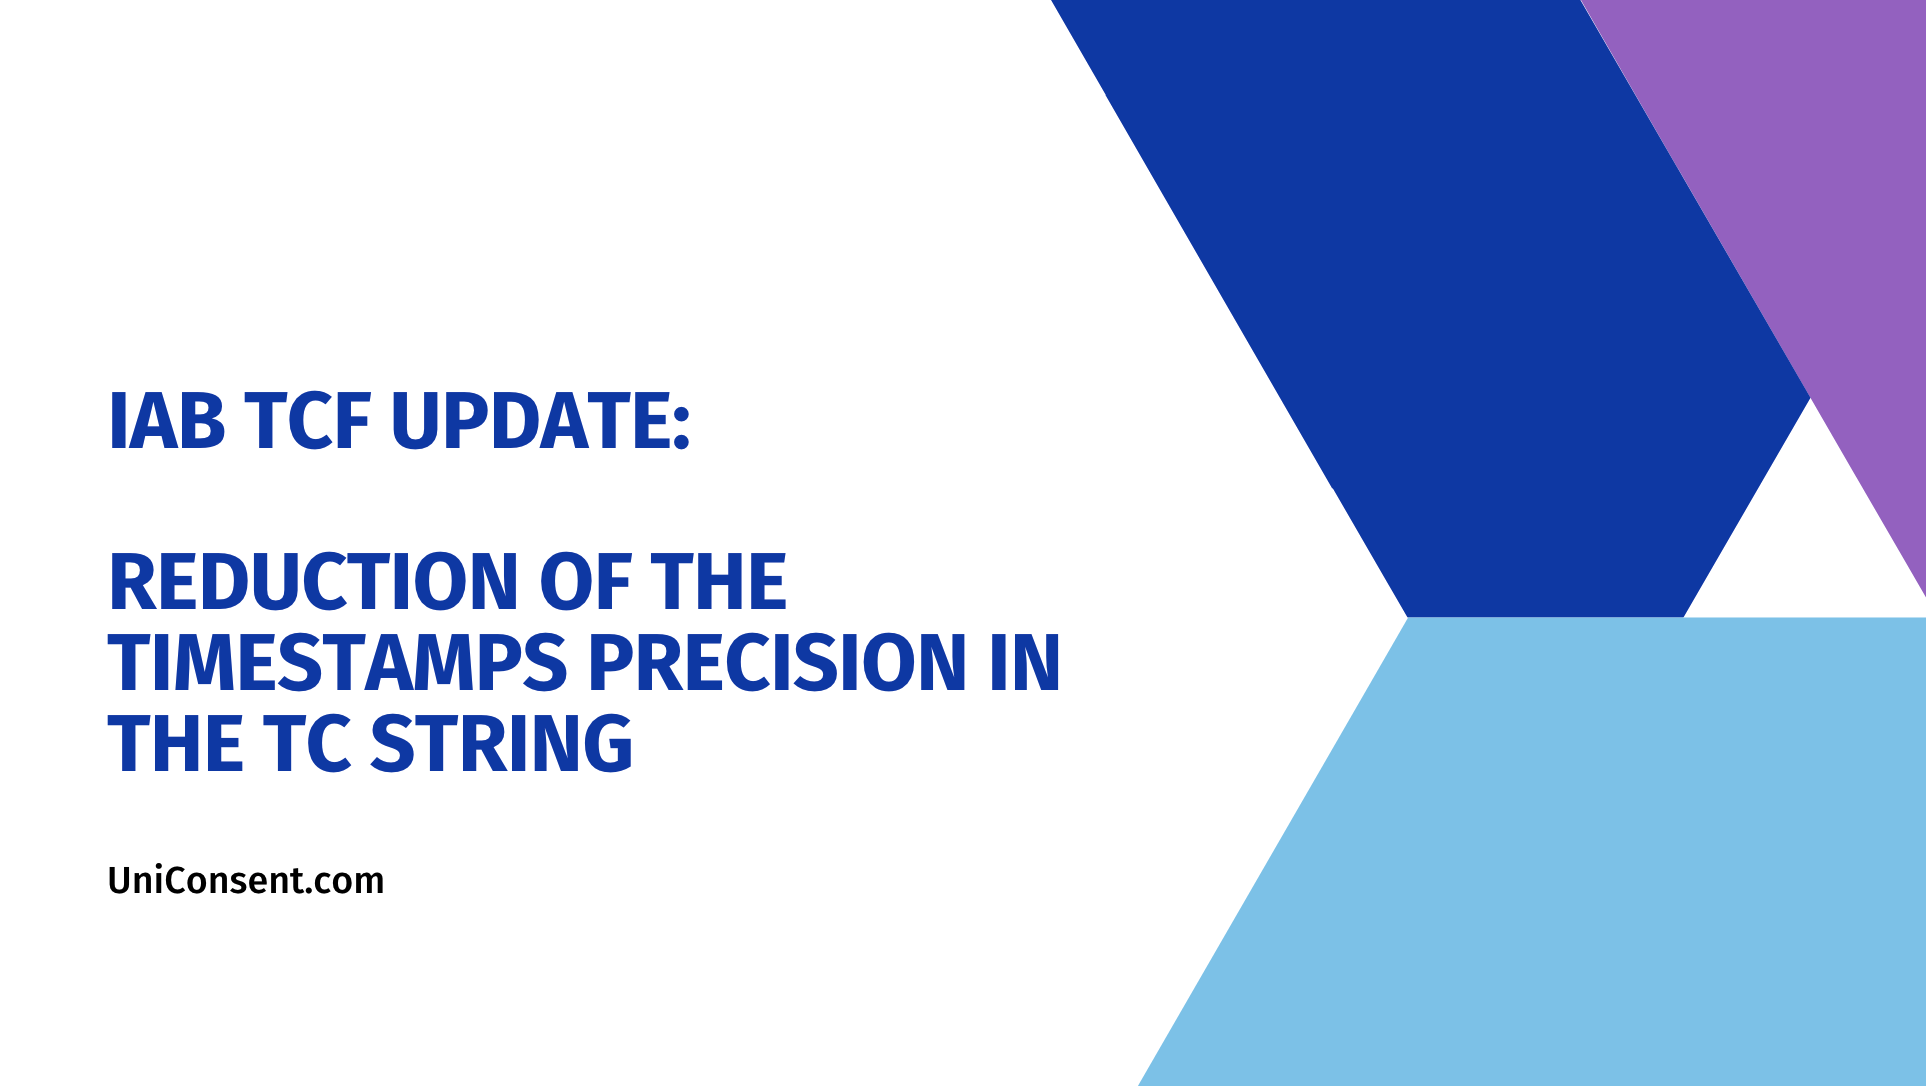 IAB TCF Update: Reduction of the timestamps’ precision in the TC String